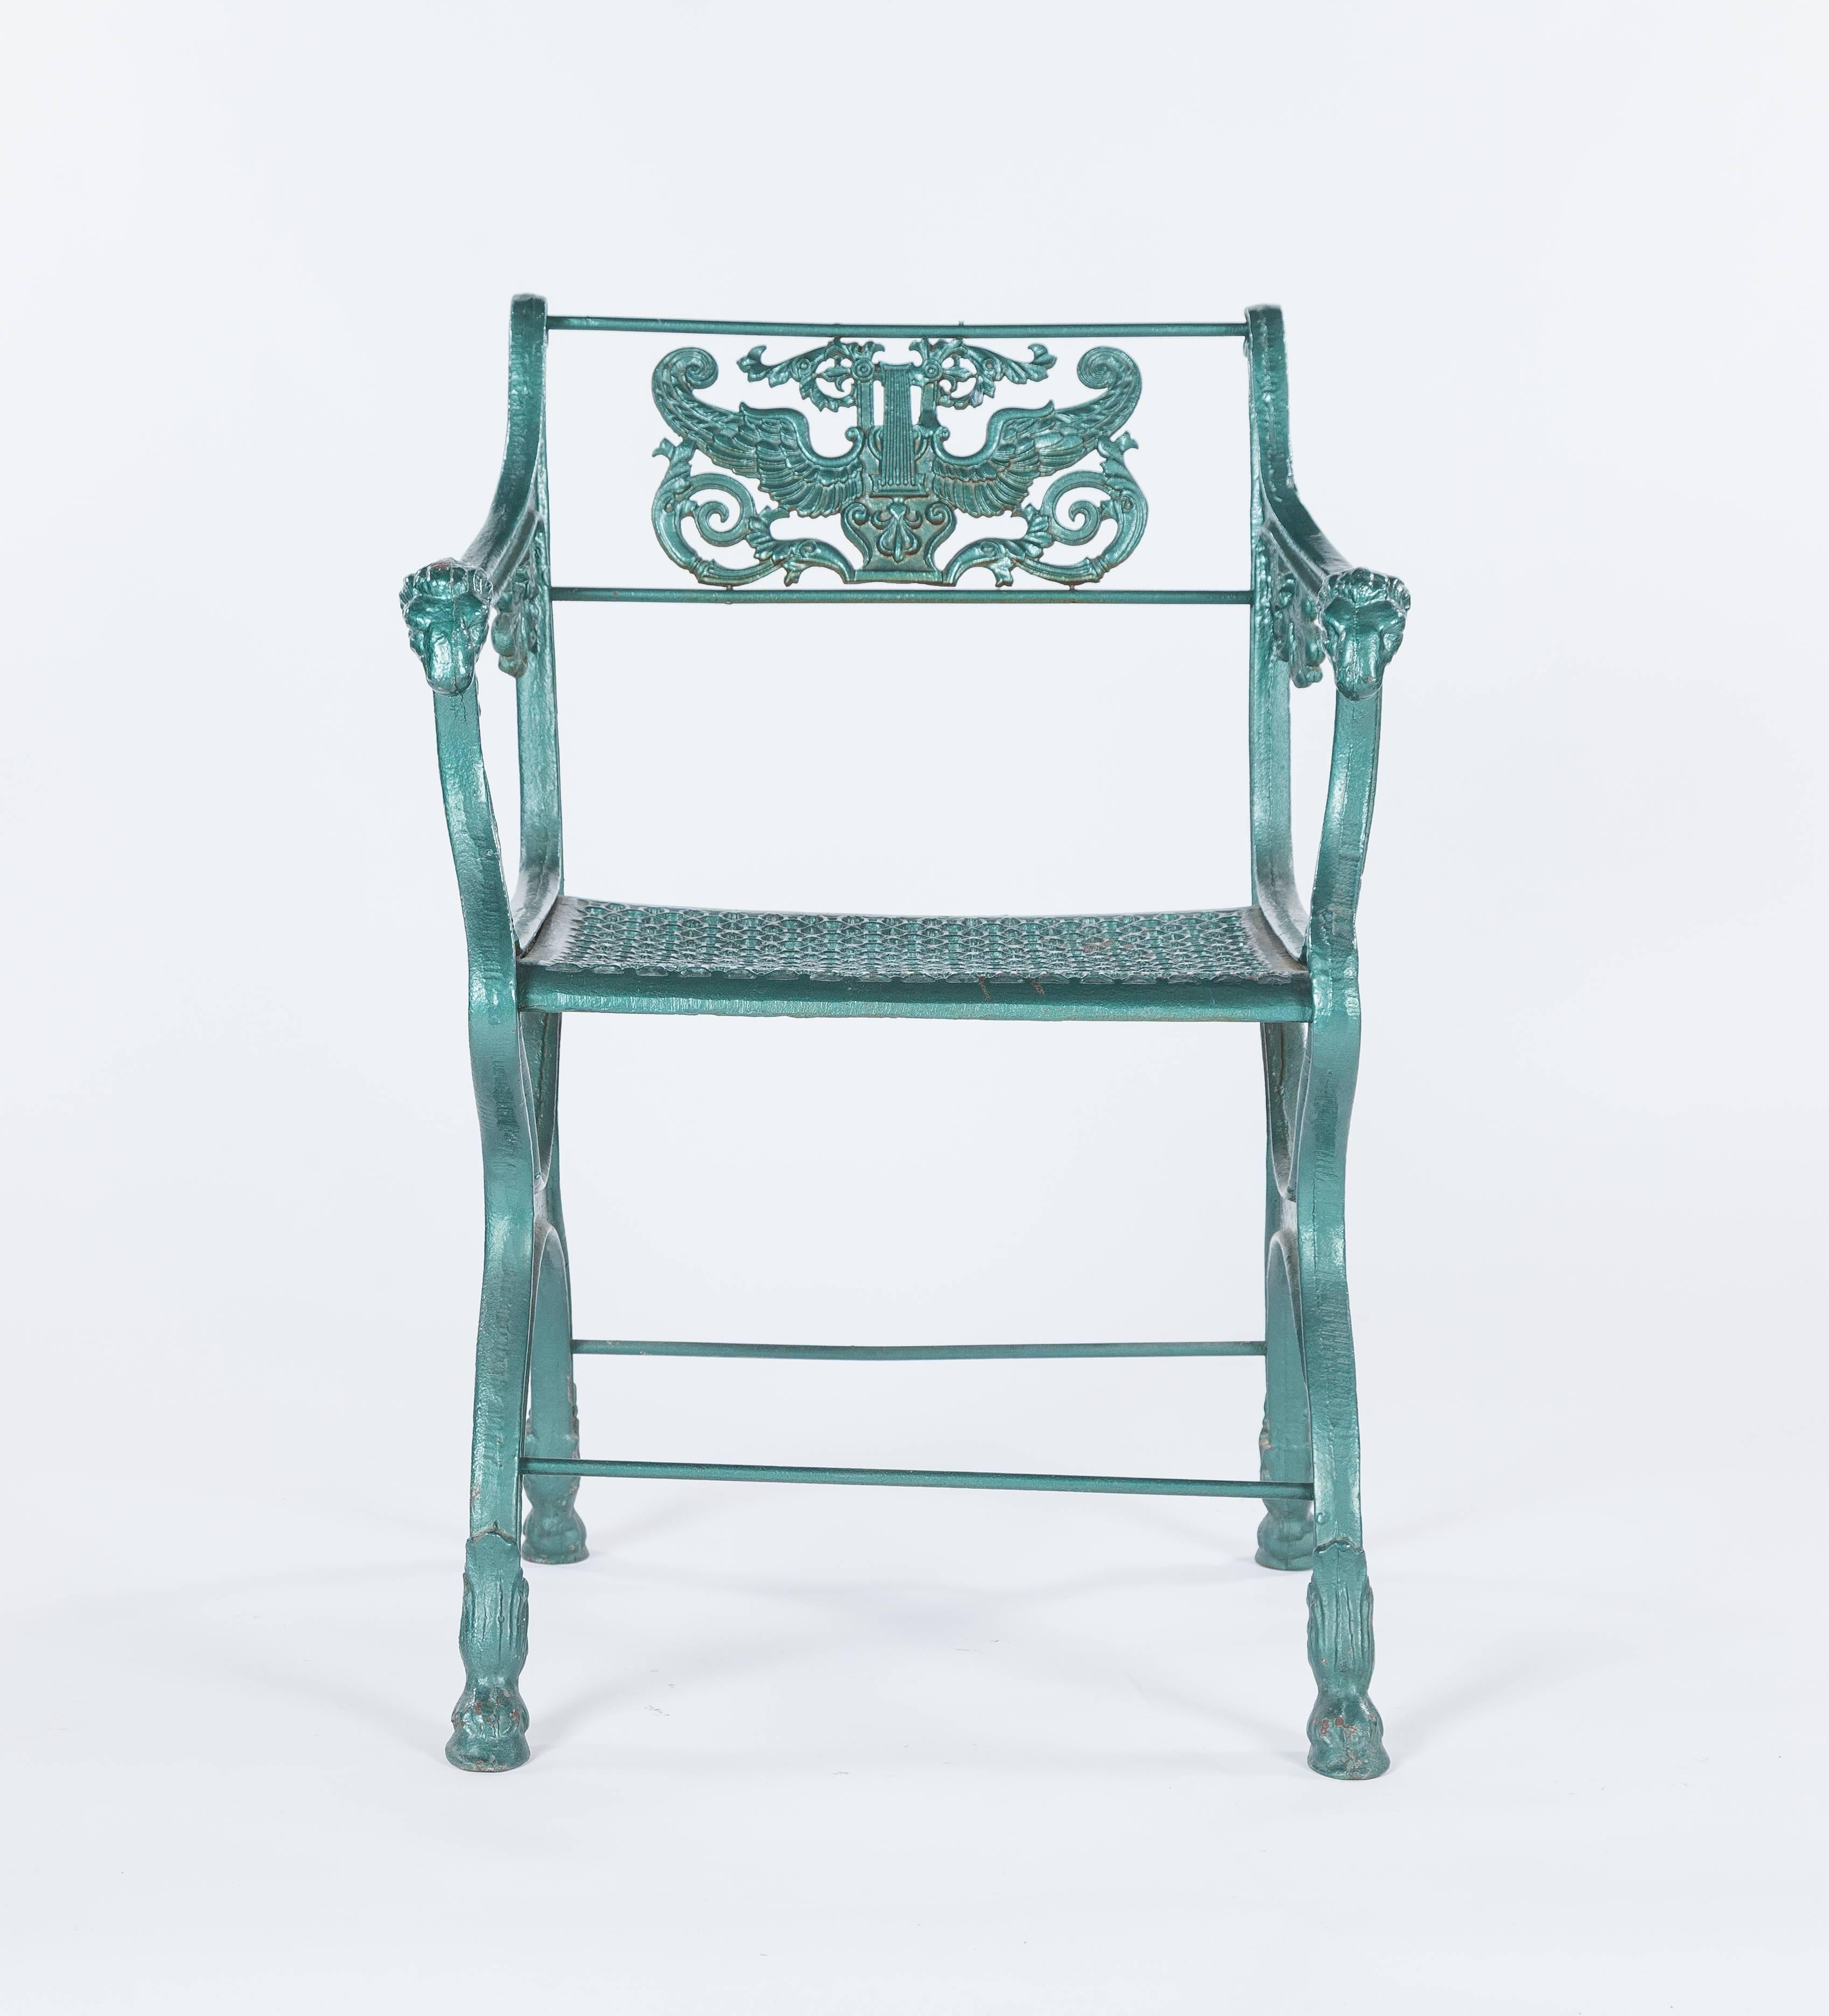 A set of two Classic Roman-style English cast iron garden chairs dating to the 19th century. They feature rams head accents on the arms. Each chairs measures approximately 21.5